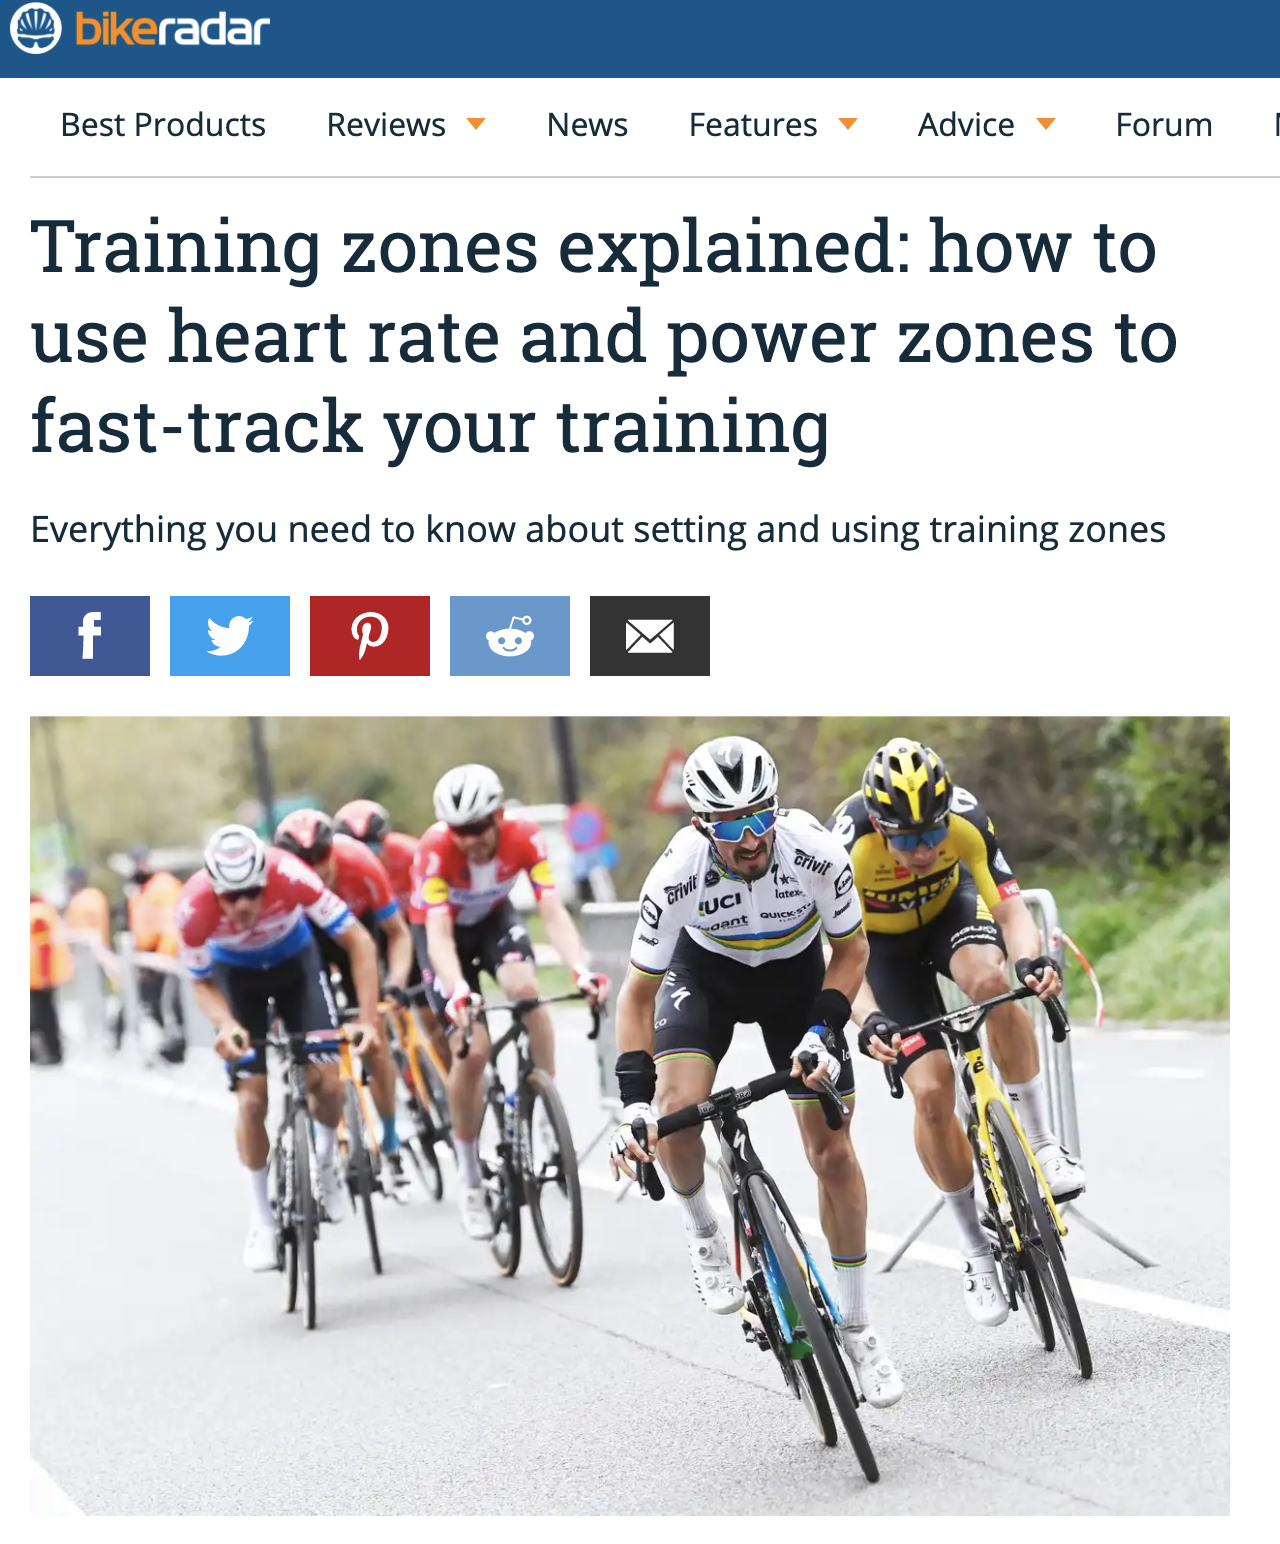 Training zones explained: how to use heart rate and power zones to fast-track your training